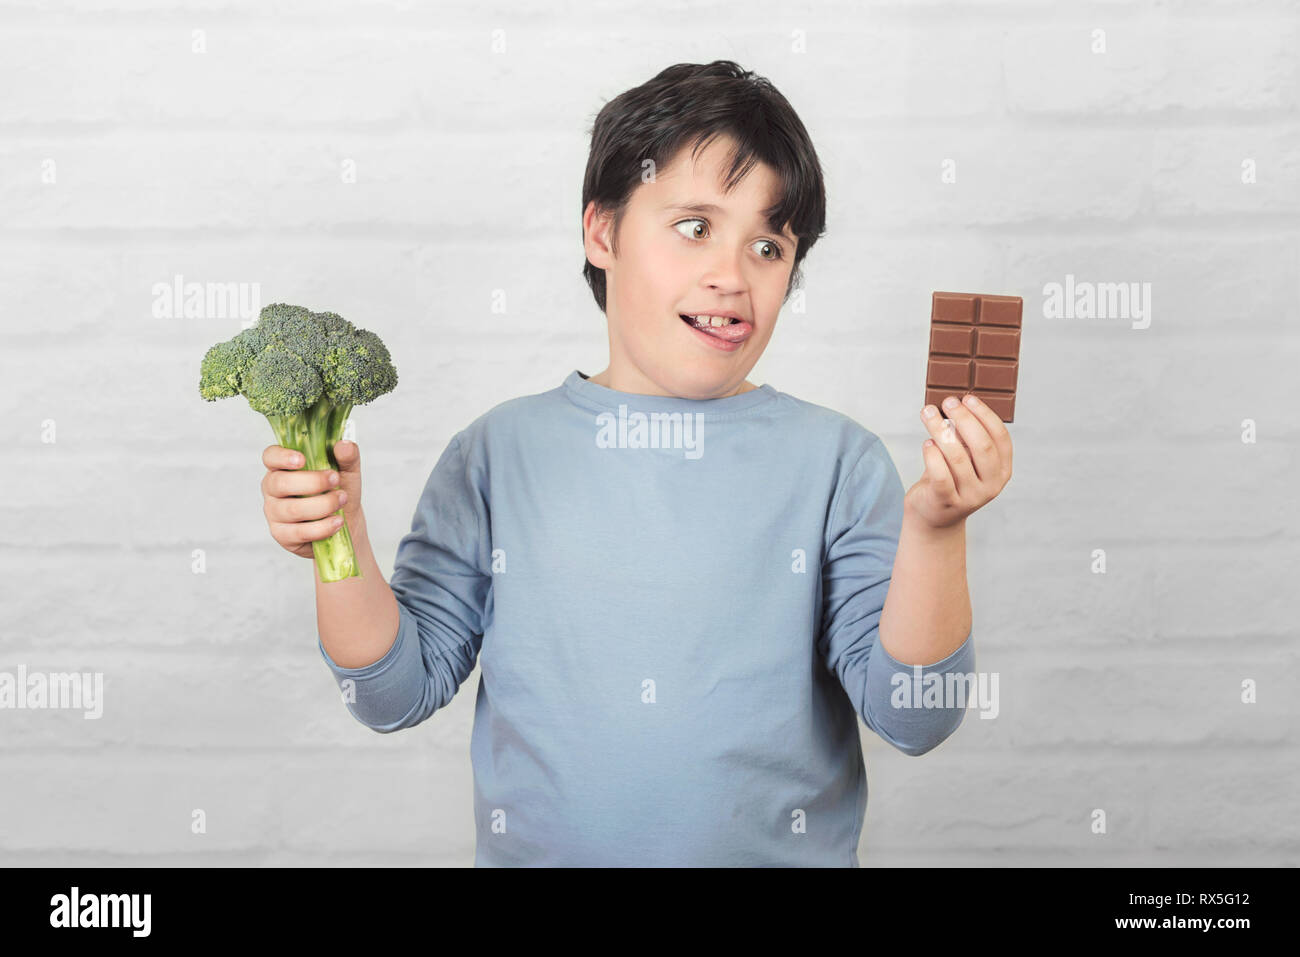 Hungry child with broccoli and an chocolate bar in his hands against brick background Stock Photo